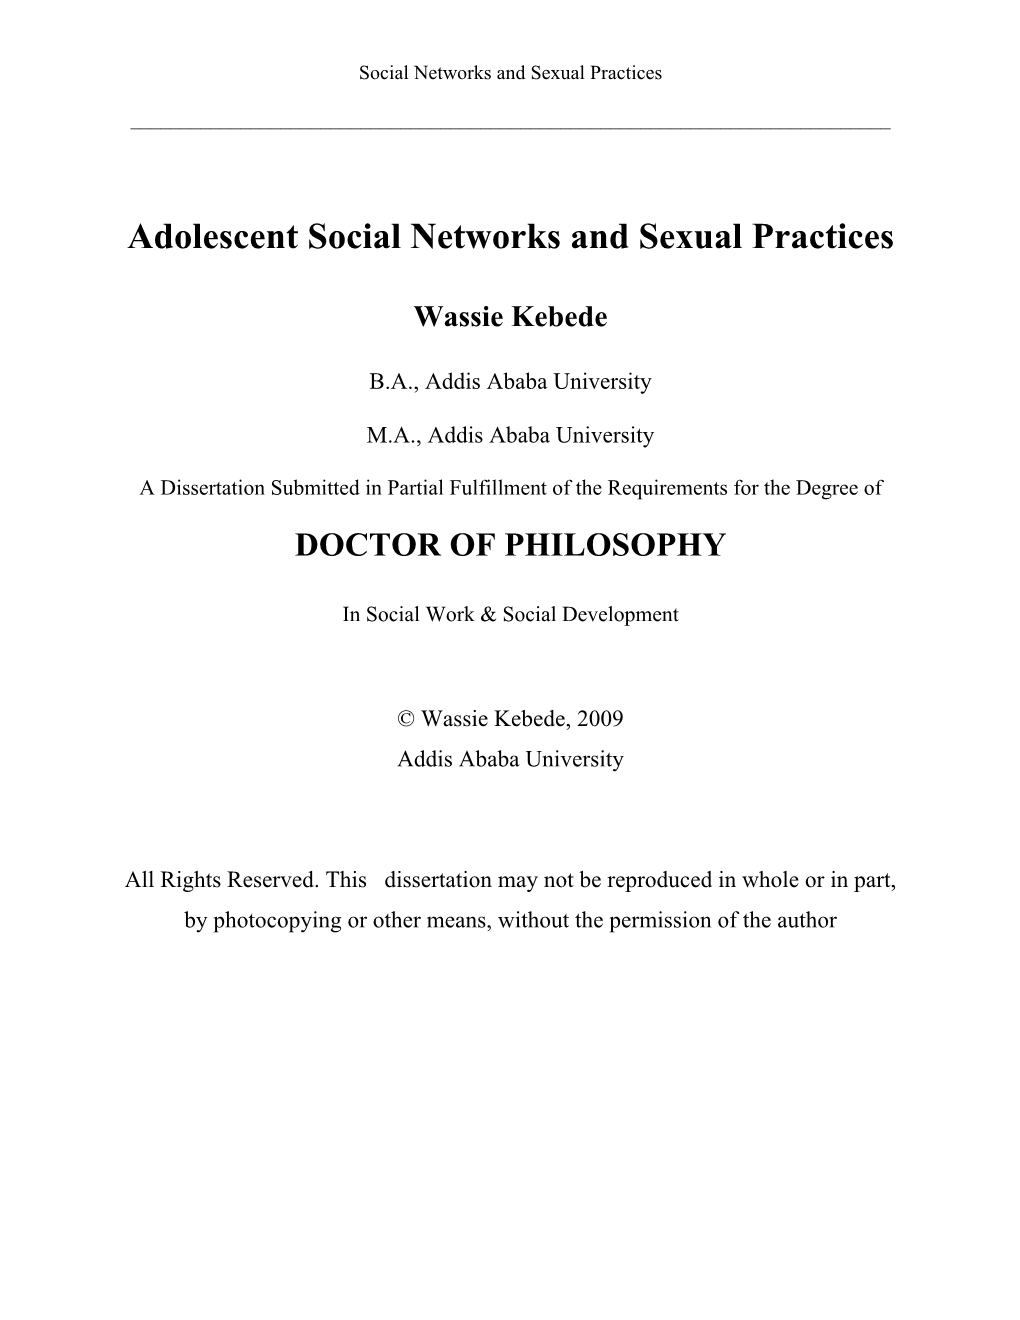 Adolescent Social Networks and Sexual Practices Wassie Kebede